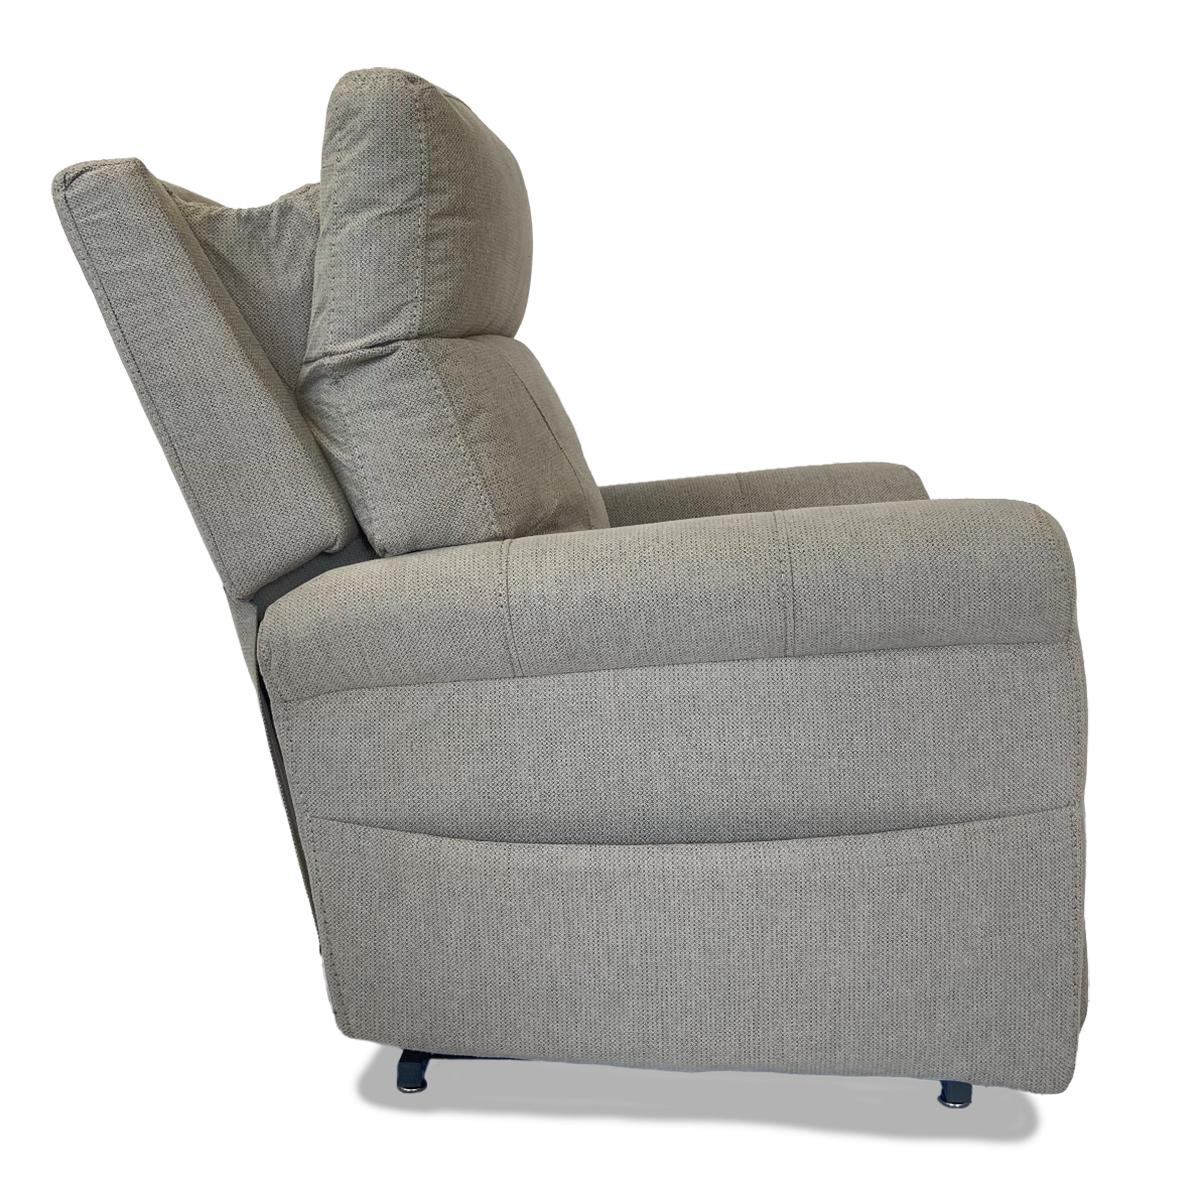 VivaLift The Weymouth Power Lift Recliner Armchair – Mobility Solutions  Direct